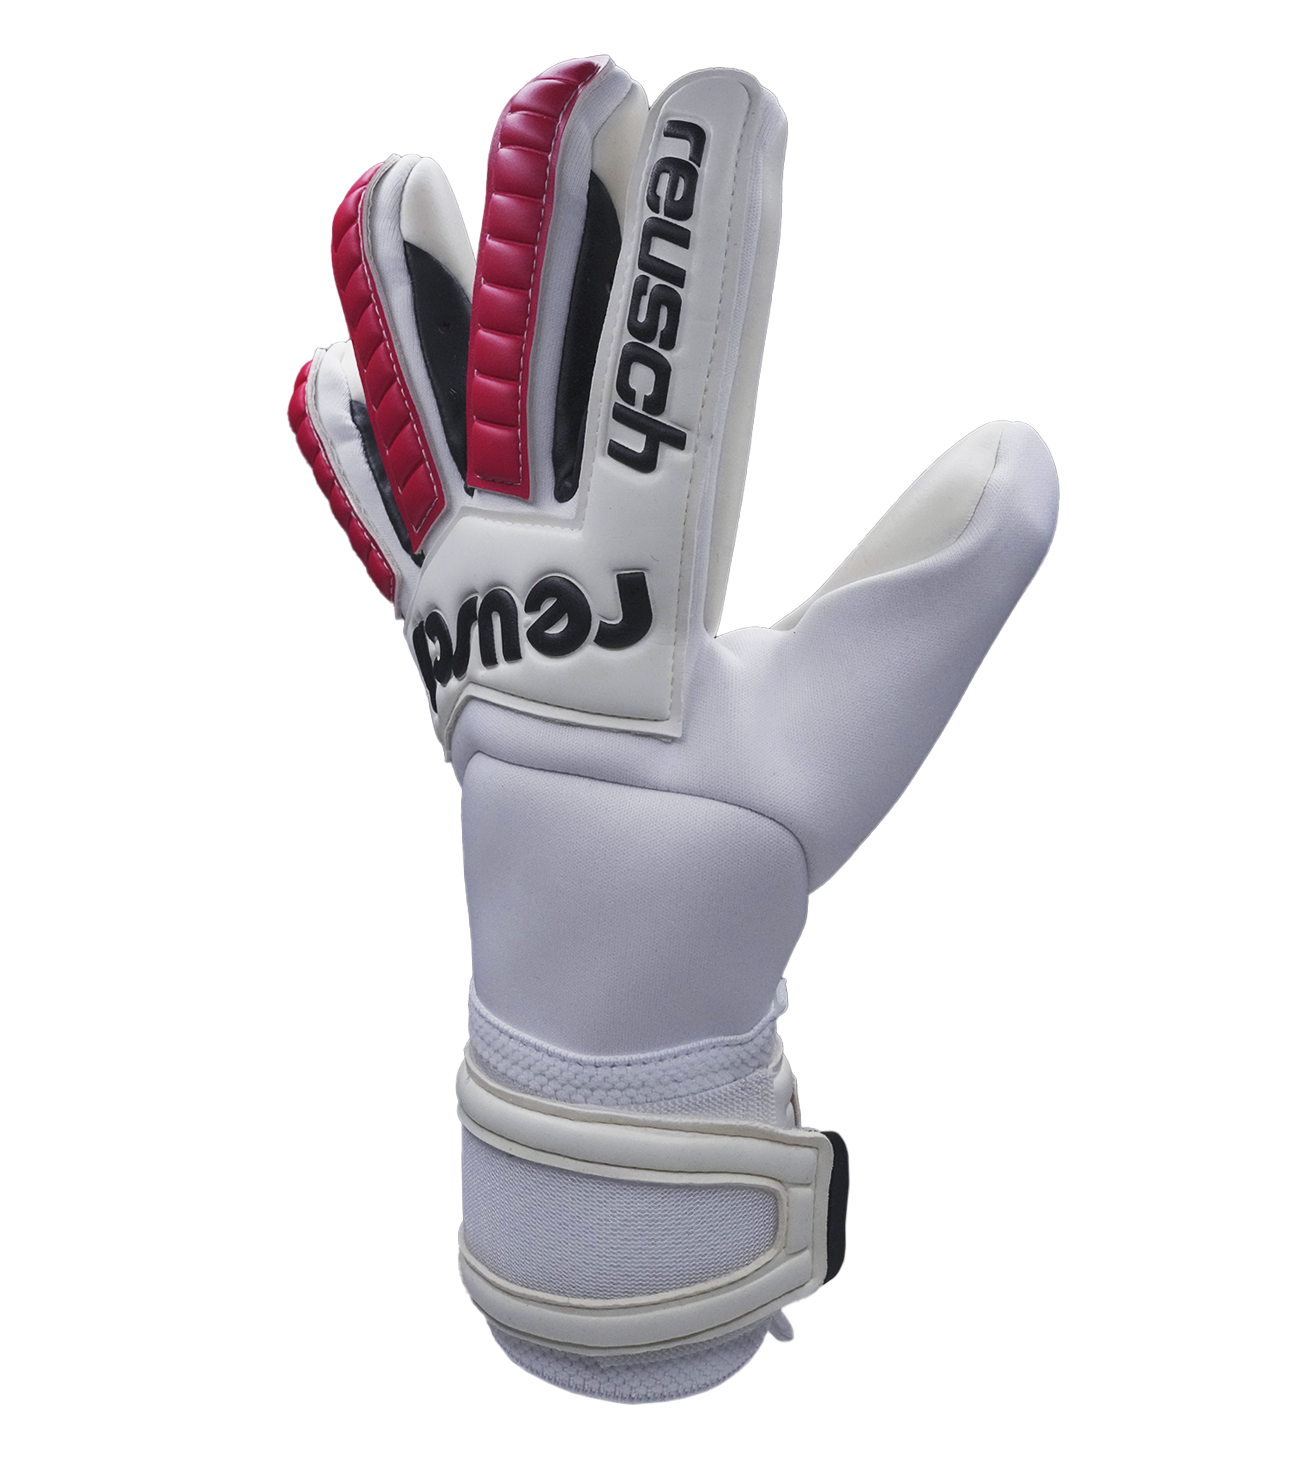 Reusch Legacy Gold X White - Red  Profesional